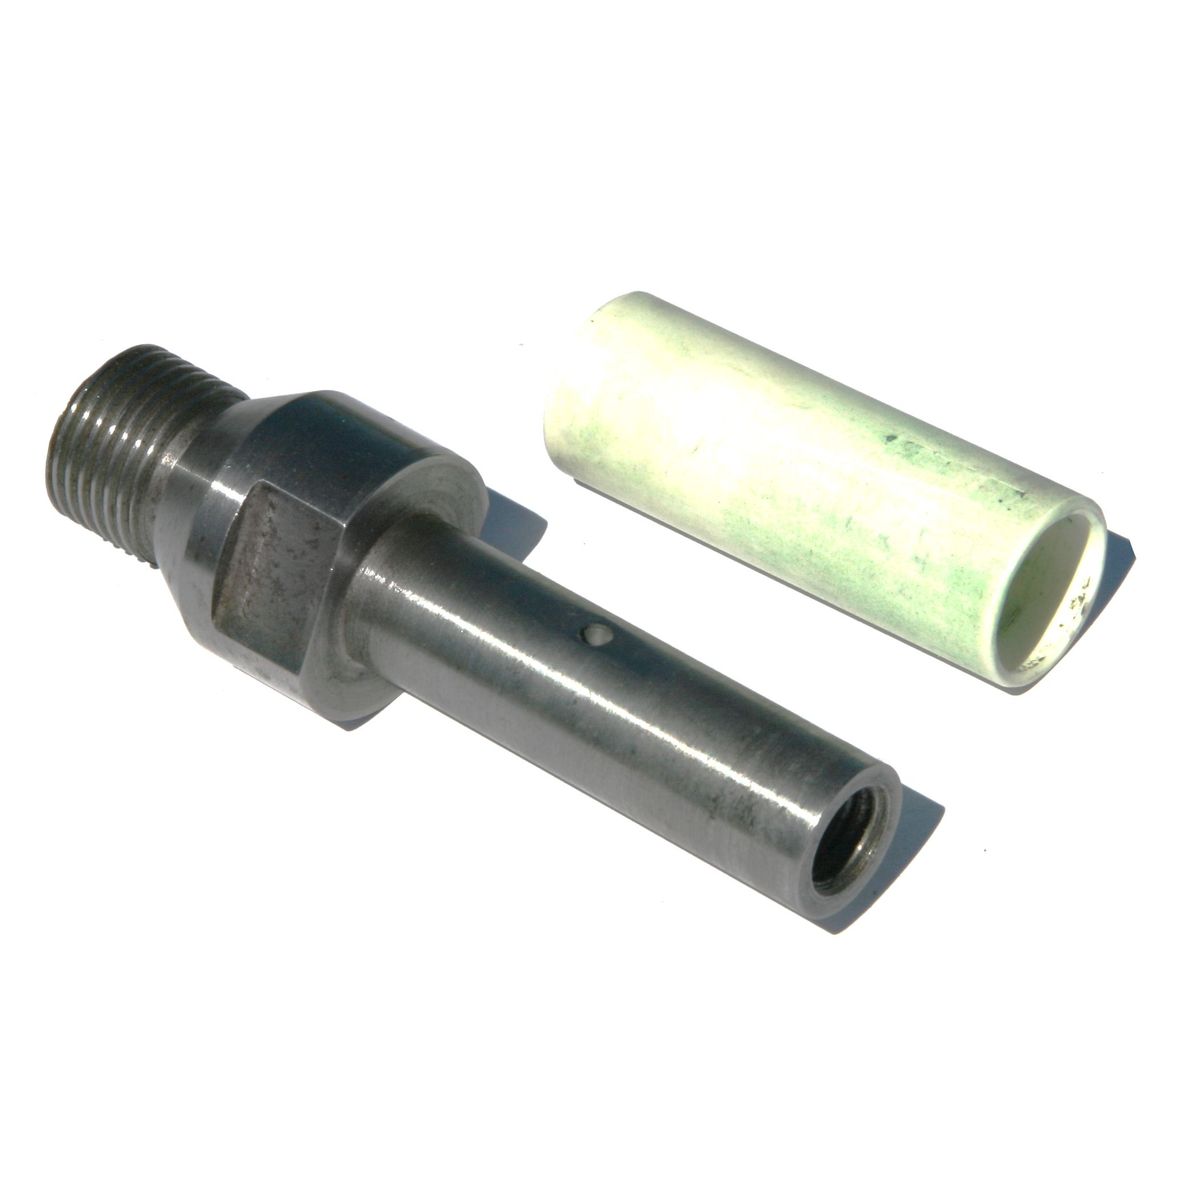 575-902 0.5-gas-to-12mm-adapter-1561498402161.jpg